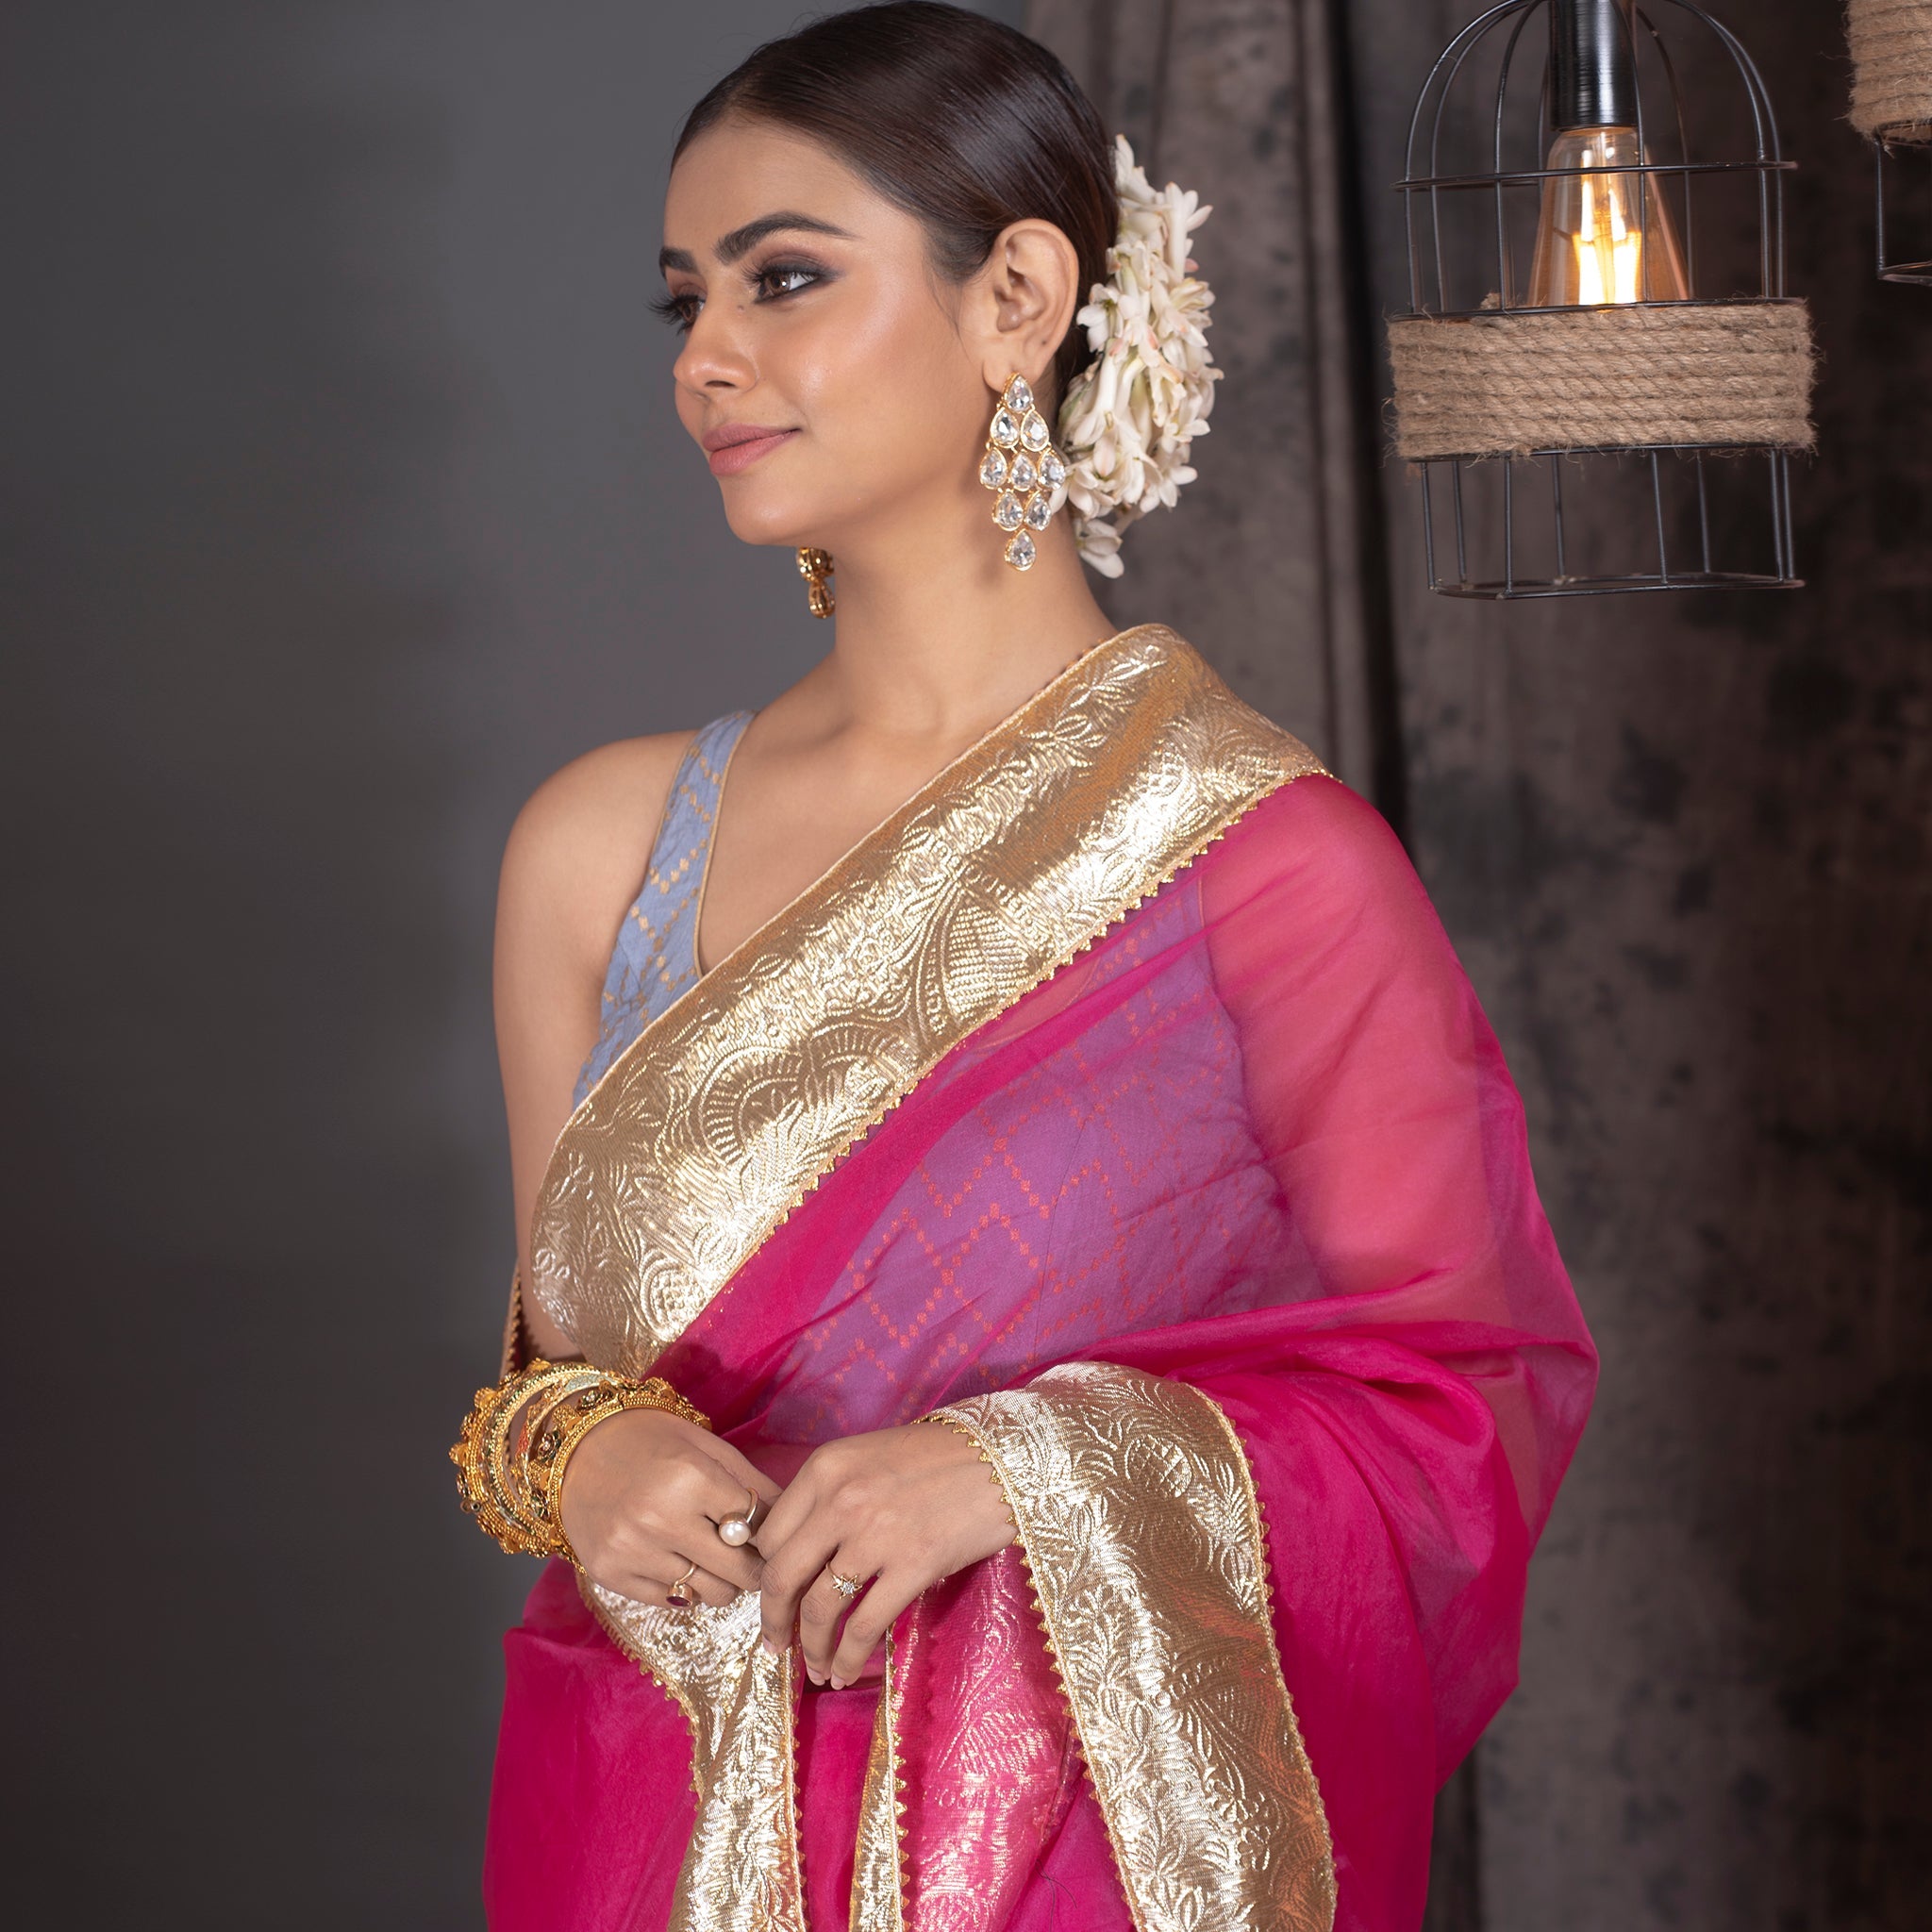 Women's Hot Pink Organza Saree With Gold Gota Border And Fringe Lace - Boveee